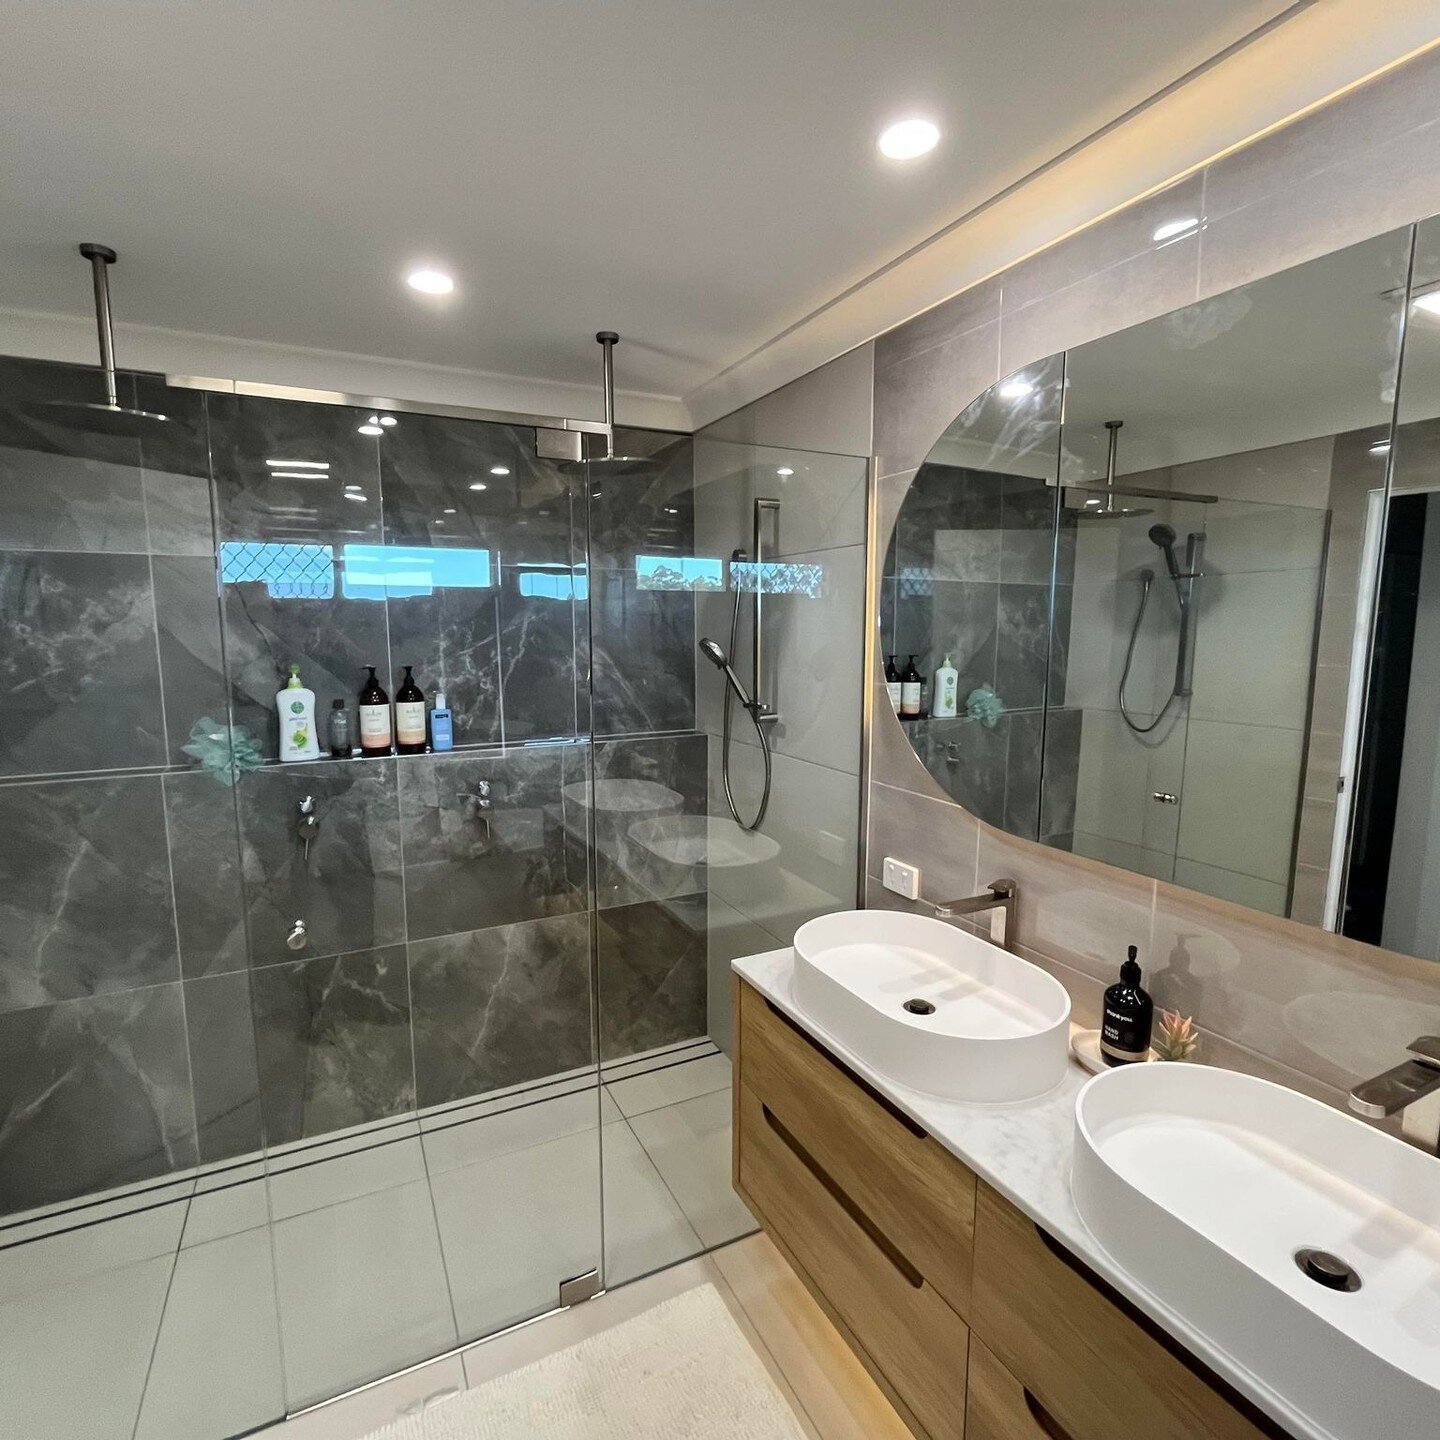 Gold Star Bathrooms is your one-stop-shop for all your bathroom renovation needs in Brisbane. We offer a wide range of services including design, installation, and project management to ensure that your bathroom renovation is stress-free and complete